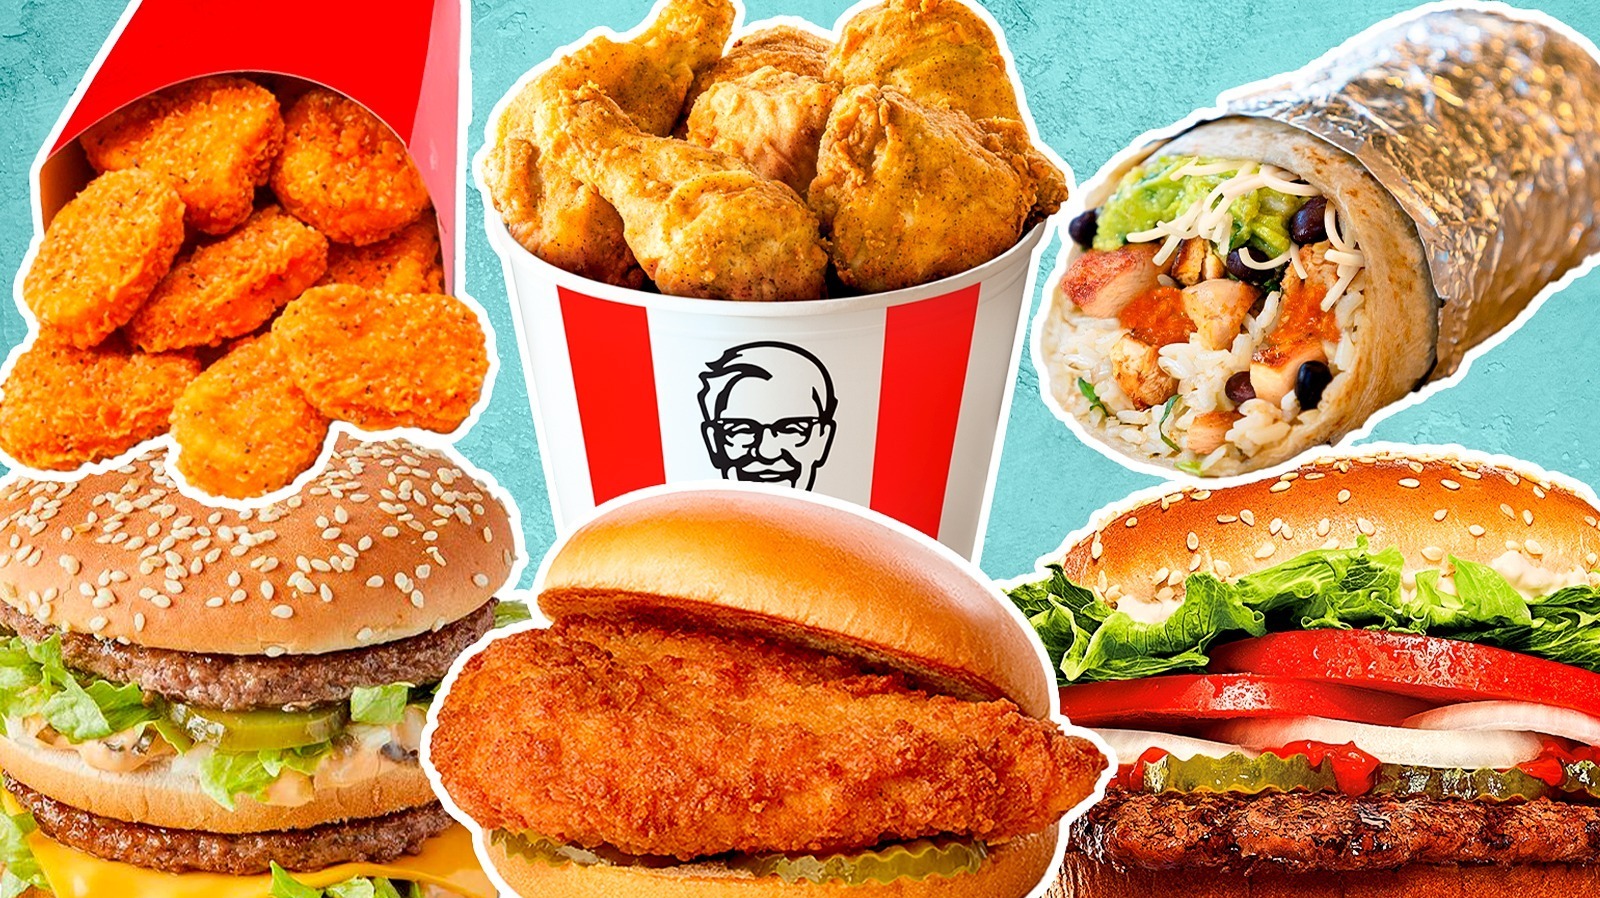 https://www.thedailymeal.com/img/gallery/the-15-most-ordered-fast-food-items-from-popular-chains/l-intro-1684169287.jpg